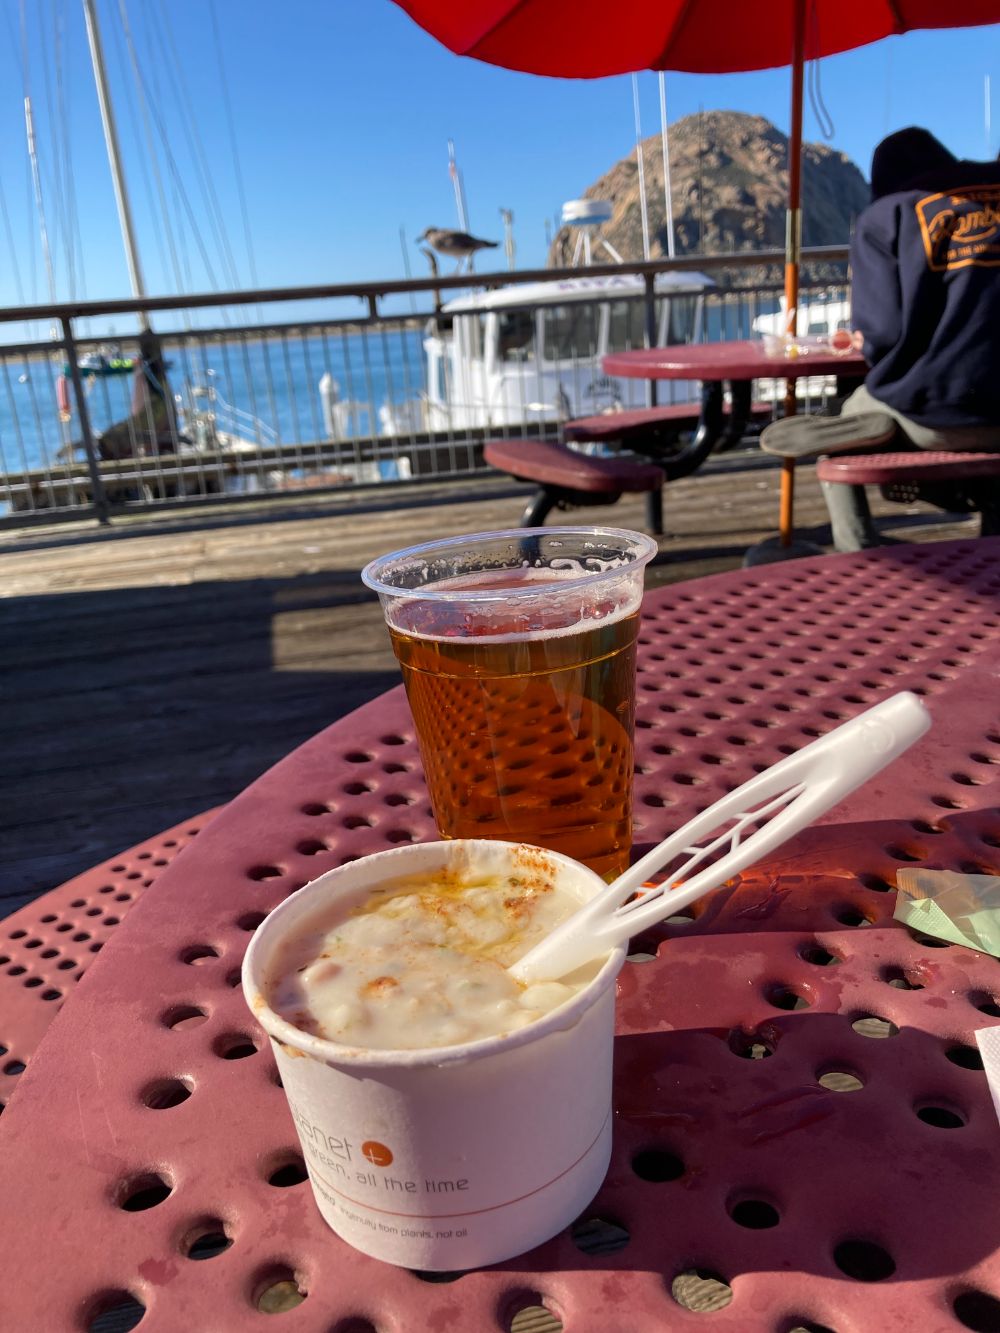 An afternoon in Morro Bay